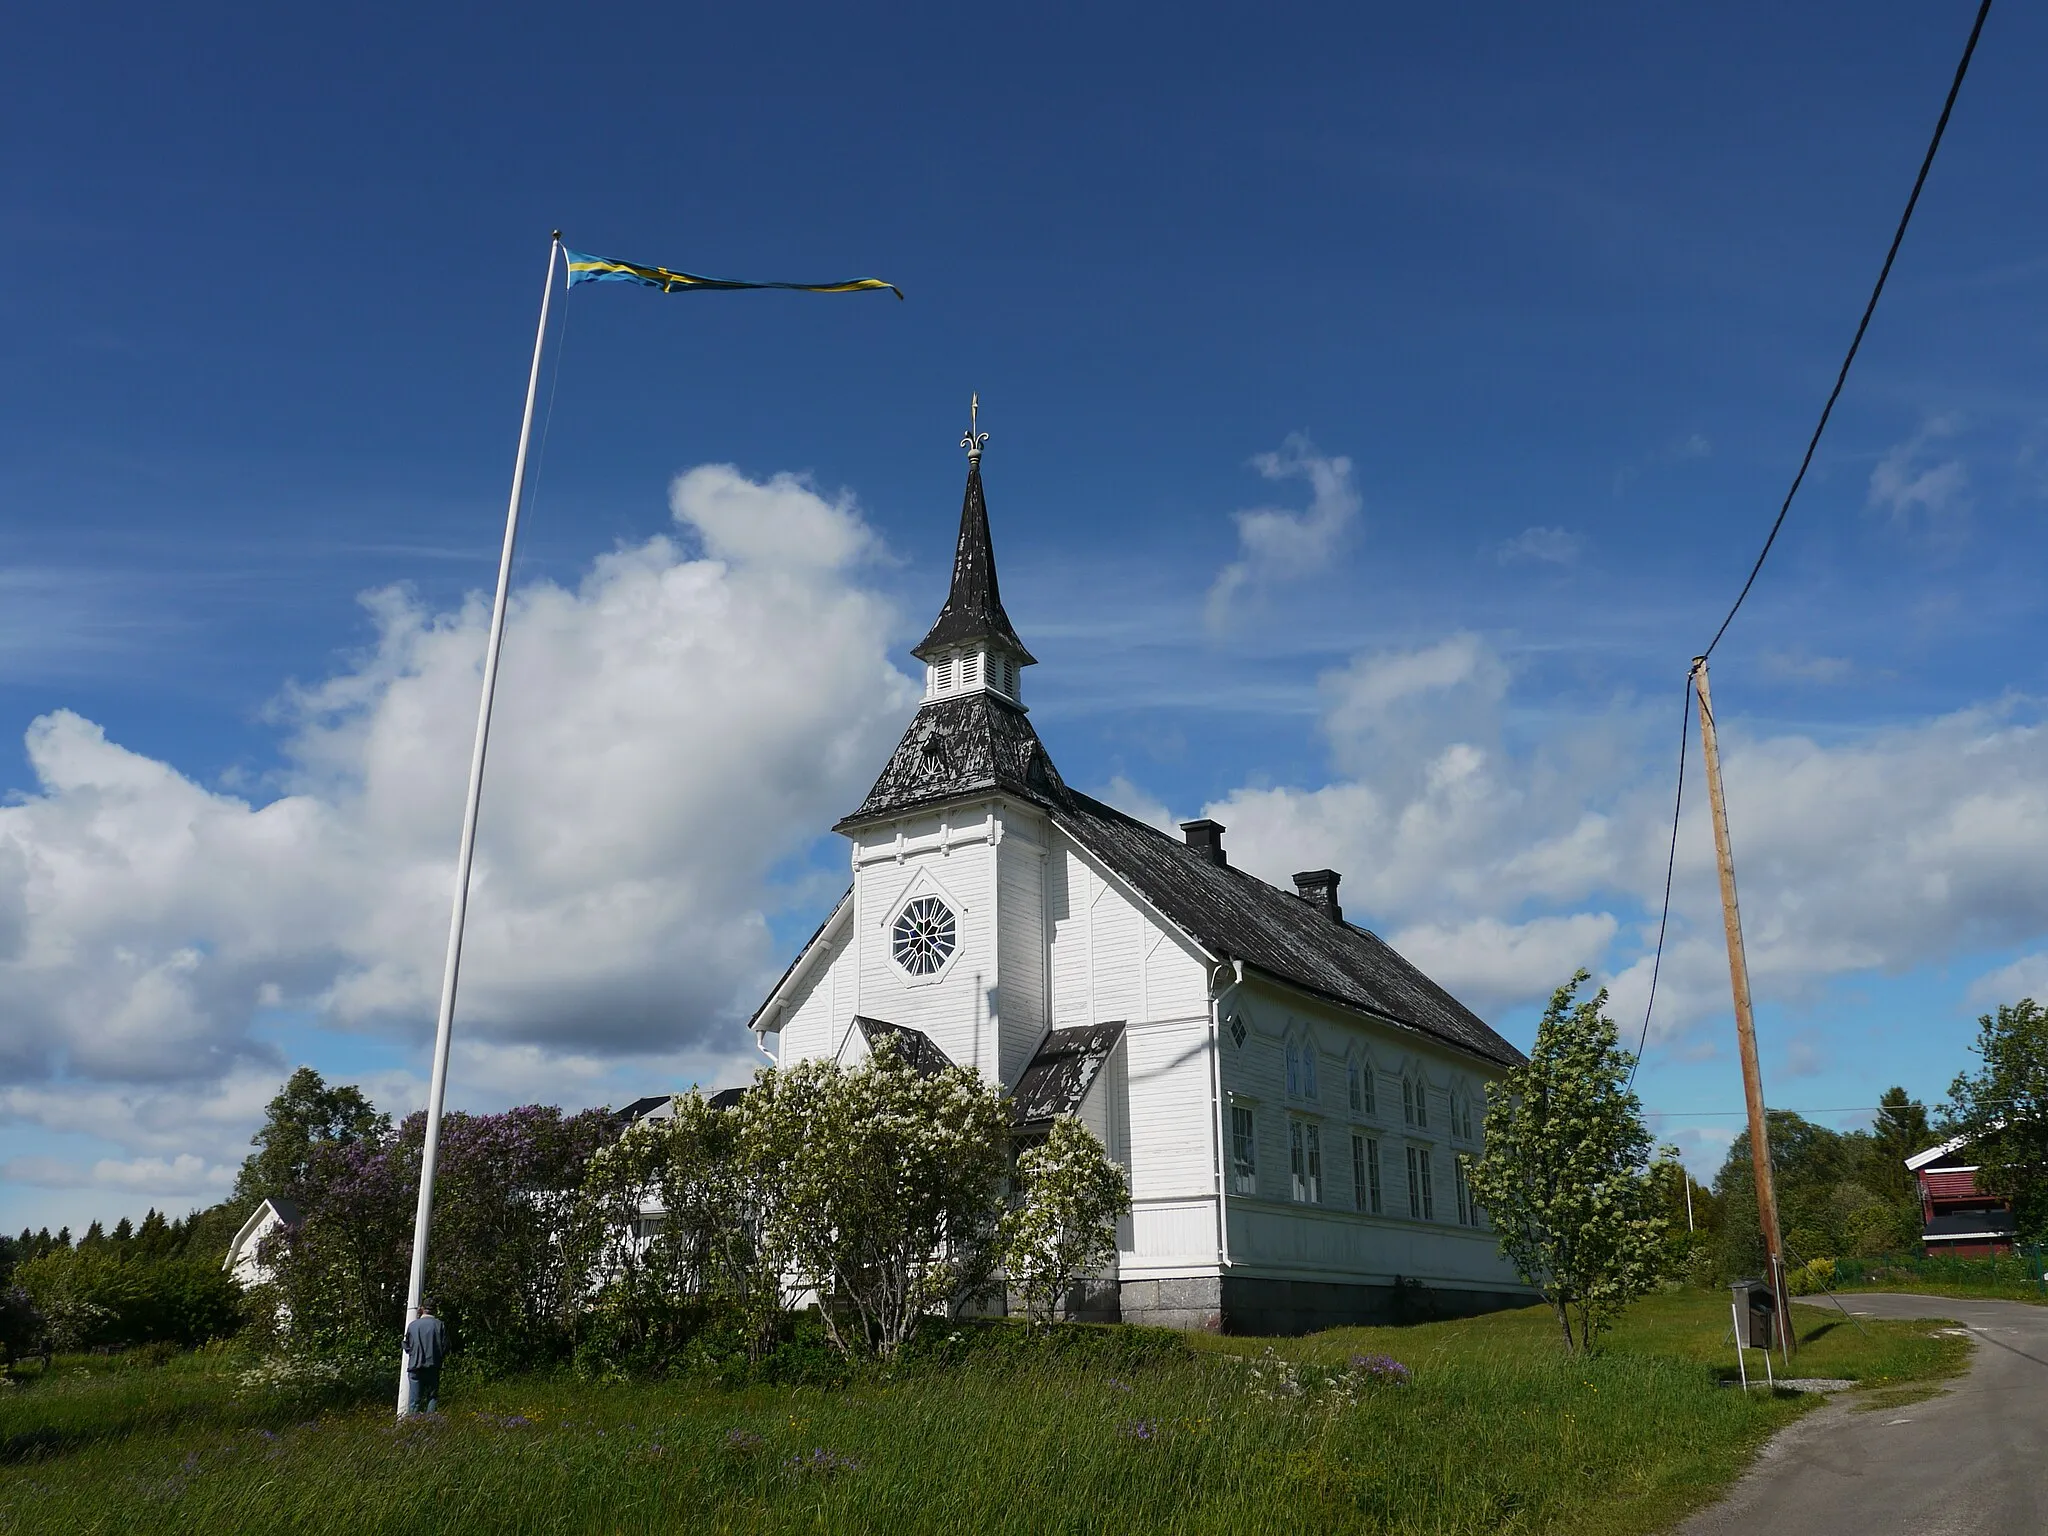 Photo showing: The Ebeneser church in Söråker, Sweden, seen from the right.